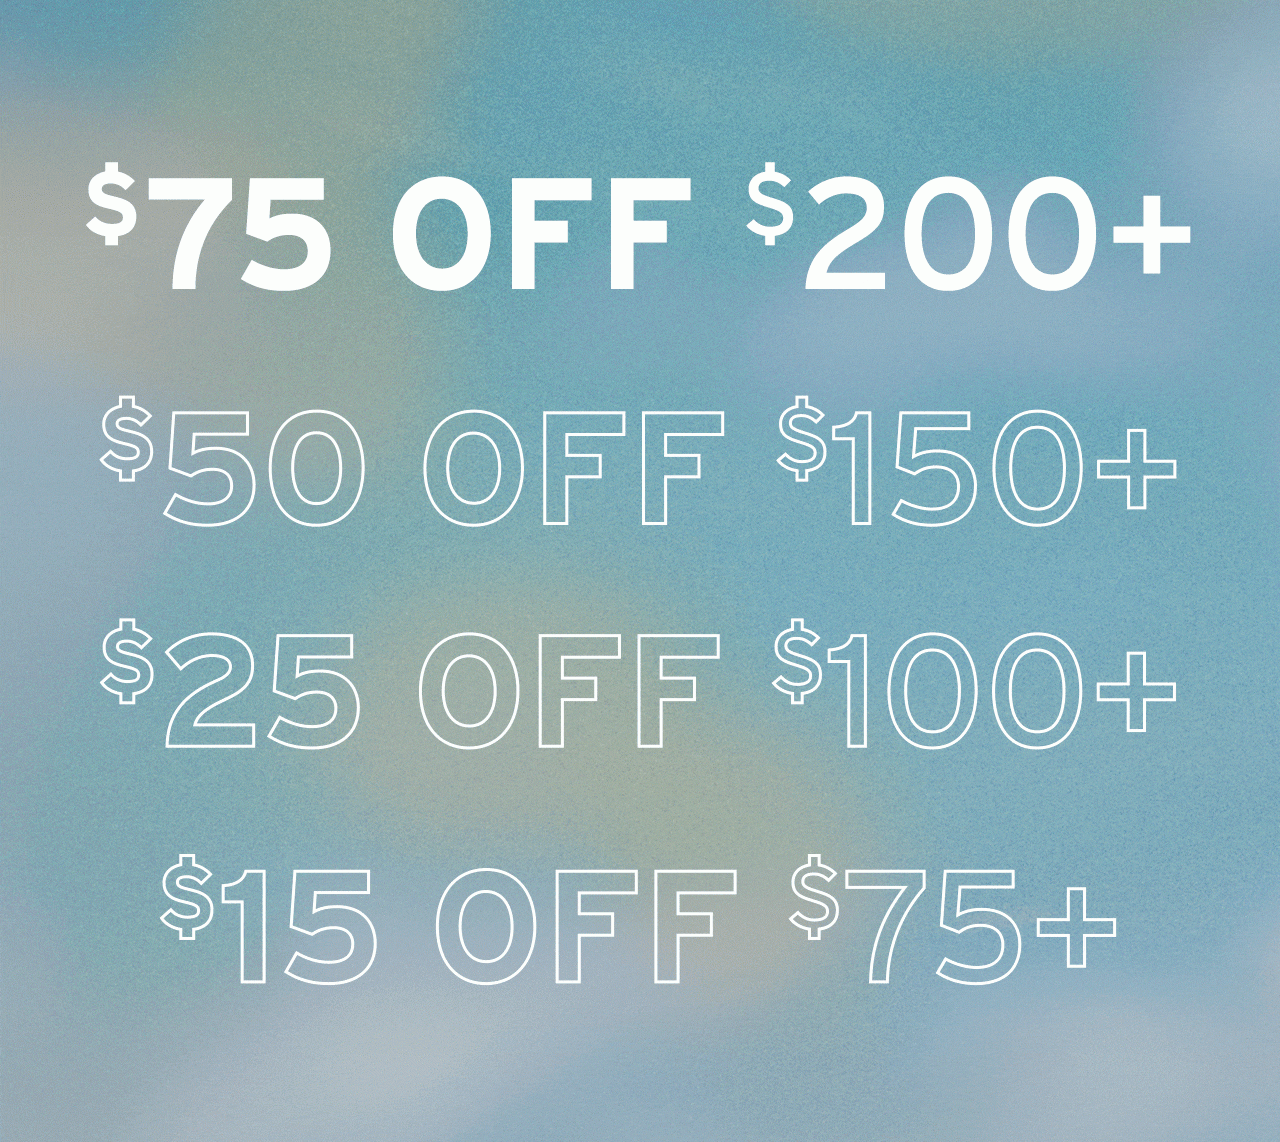 $15 OFF $75, $25 OFF $100, $50 OFF $150, $75 OFF $200. SHOP NOW